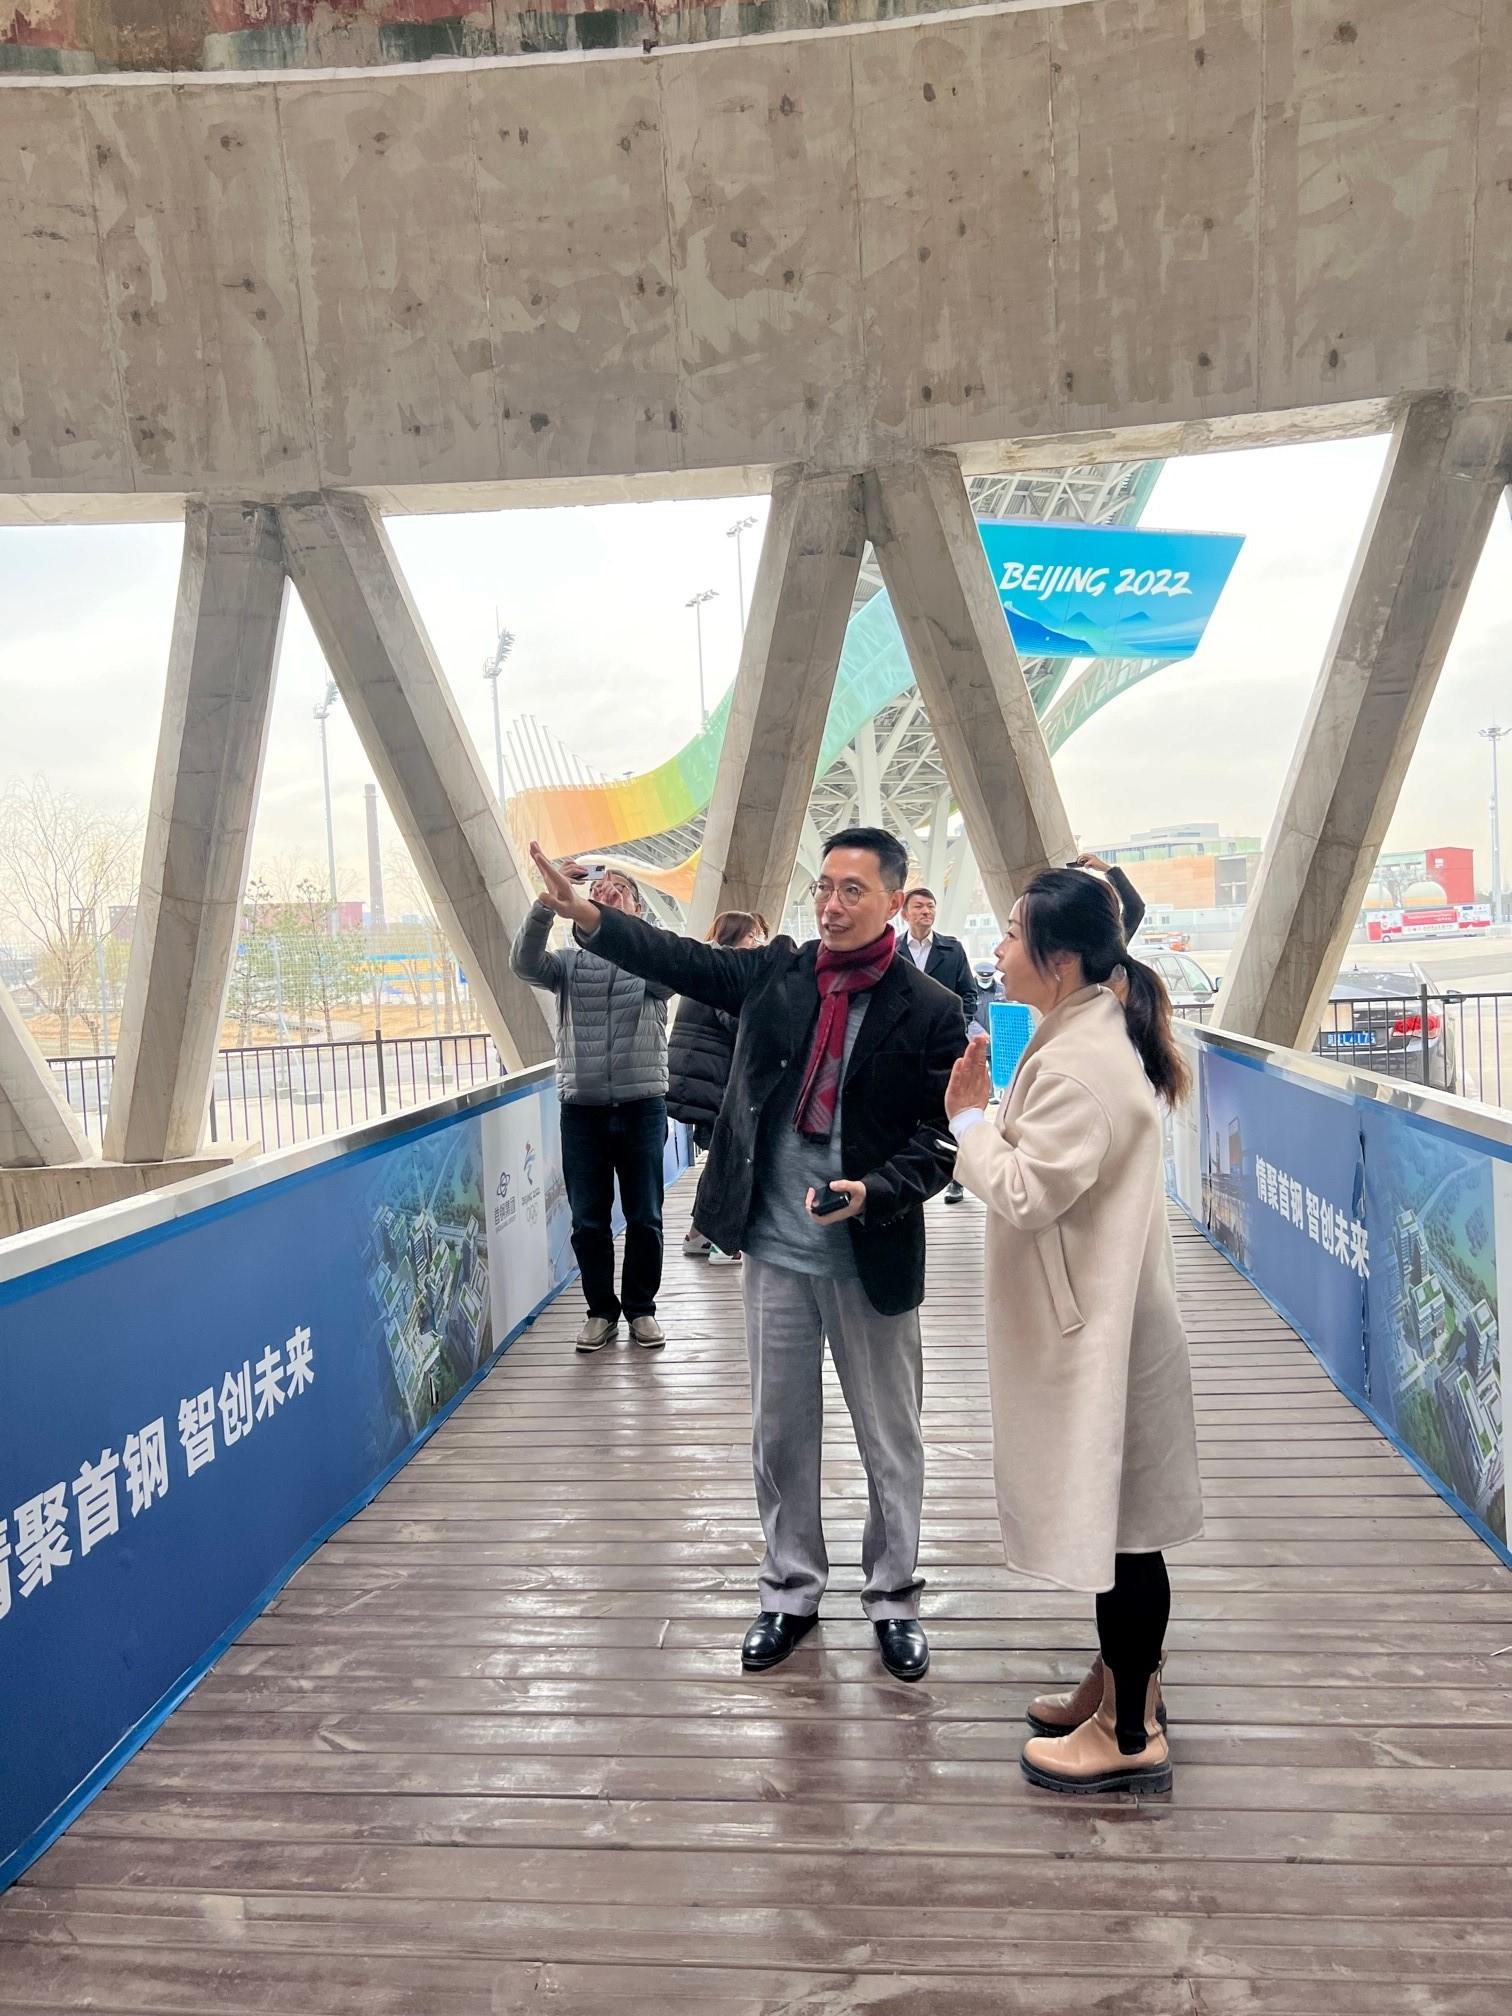 The Secretary for Culture, Sports and Tourism, Mr Kevin Yeung (left), today (March 13) visited the Big Air Shougang in Beijing.